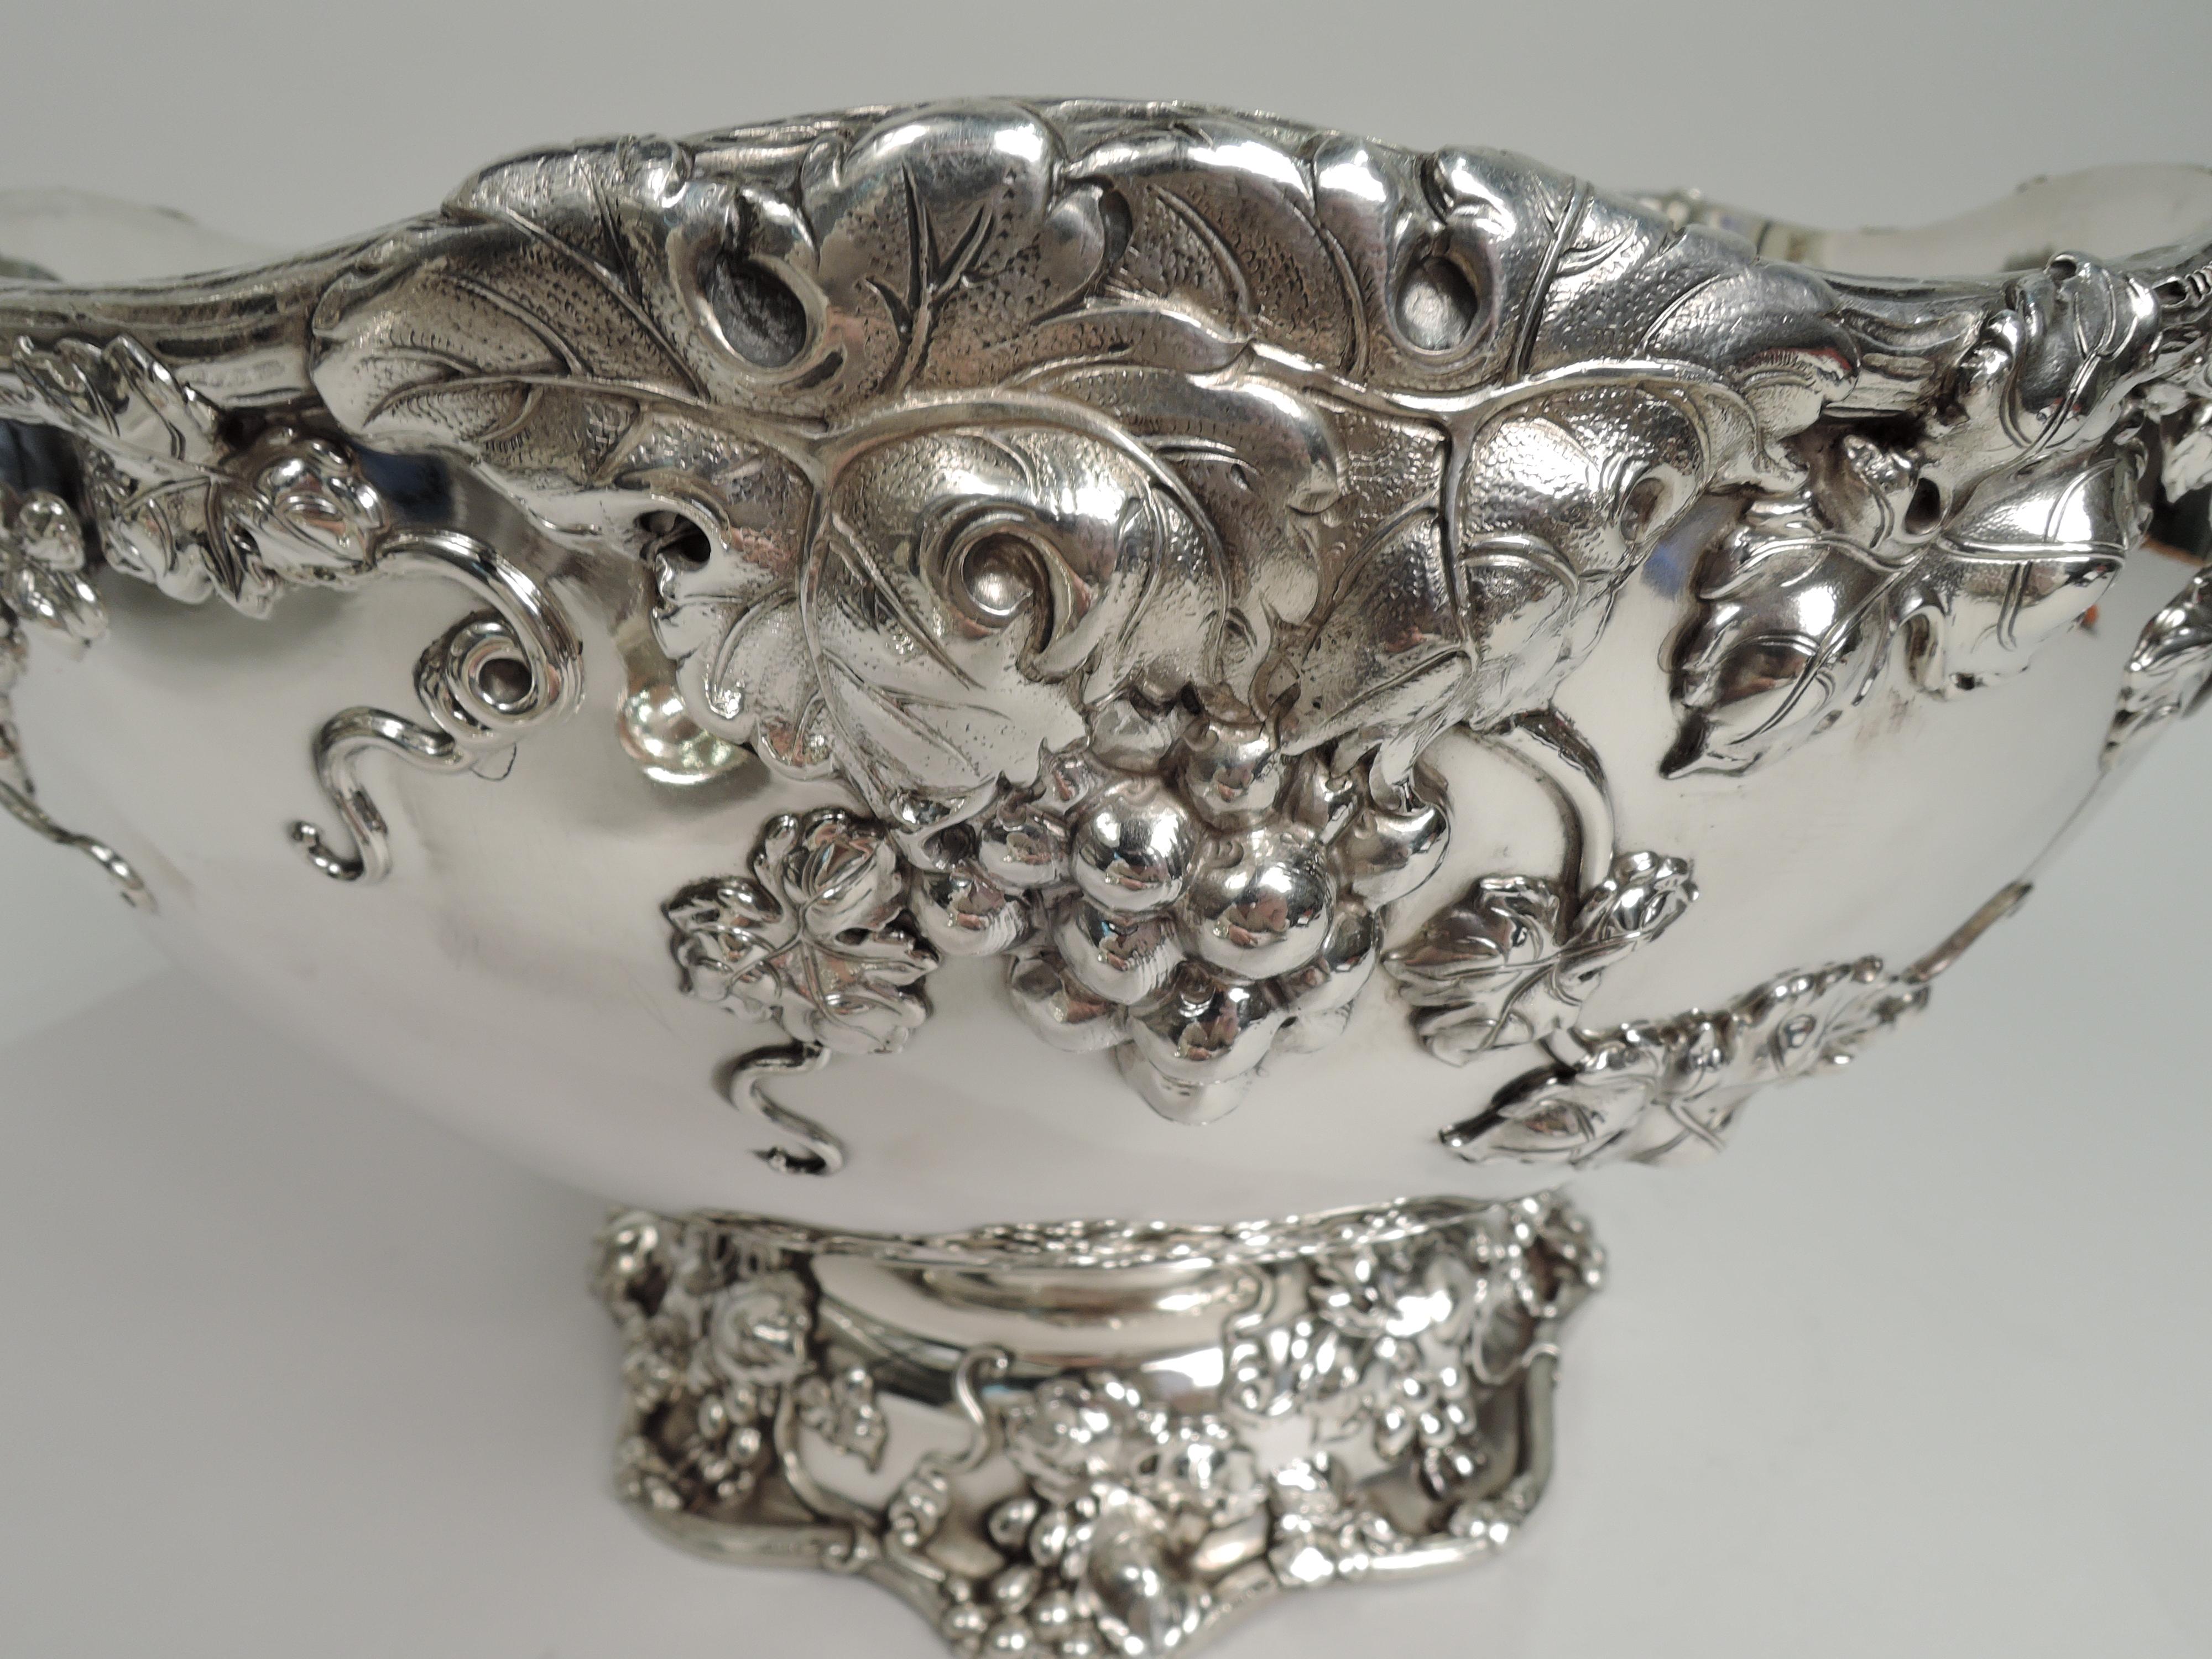 19th Century American Gilded Age Punch Bowl Centerpiece by Frank W Smith